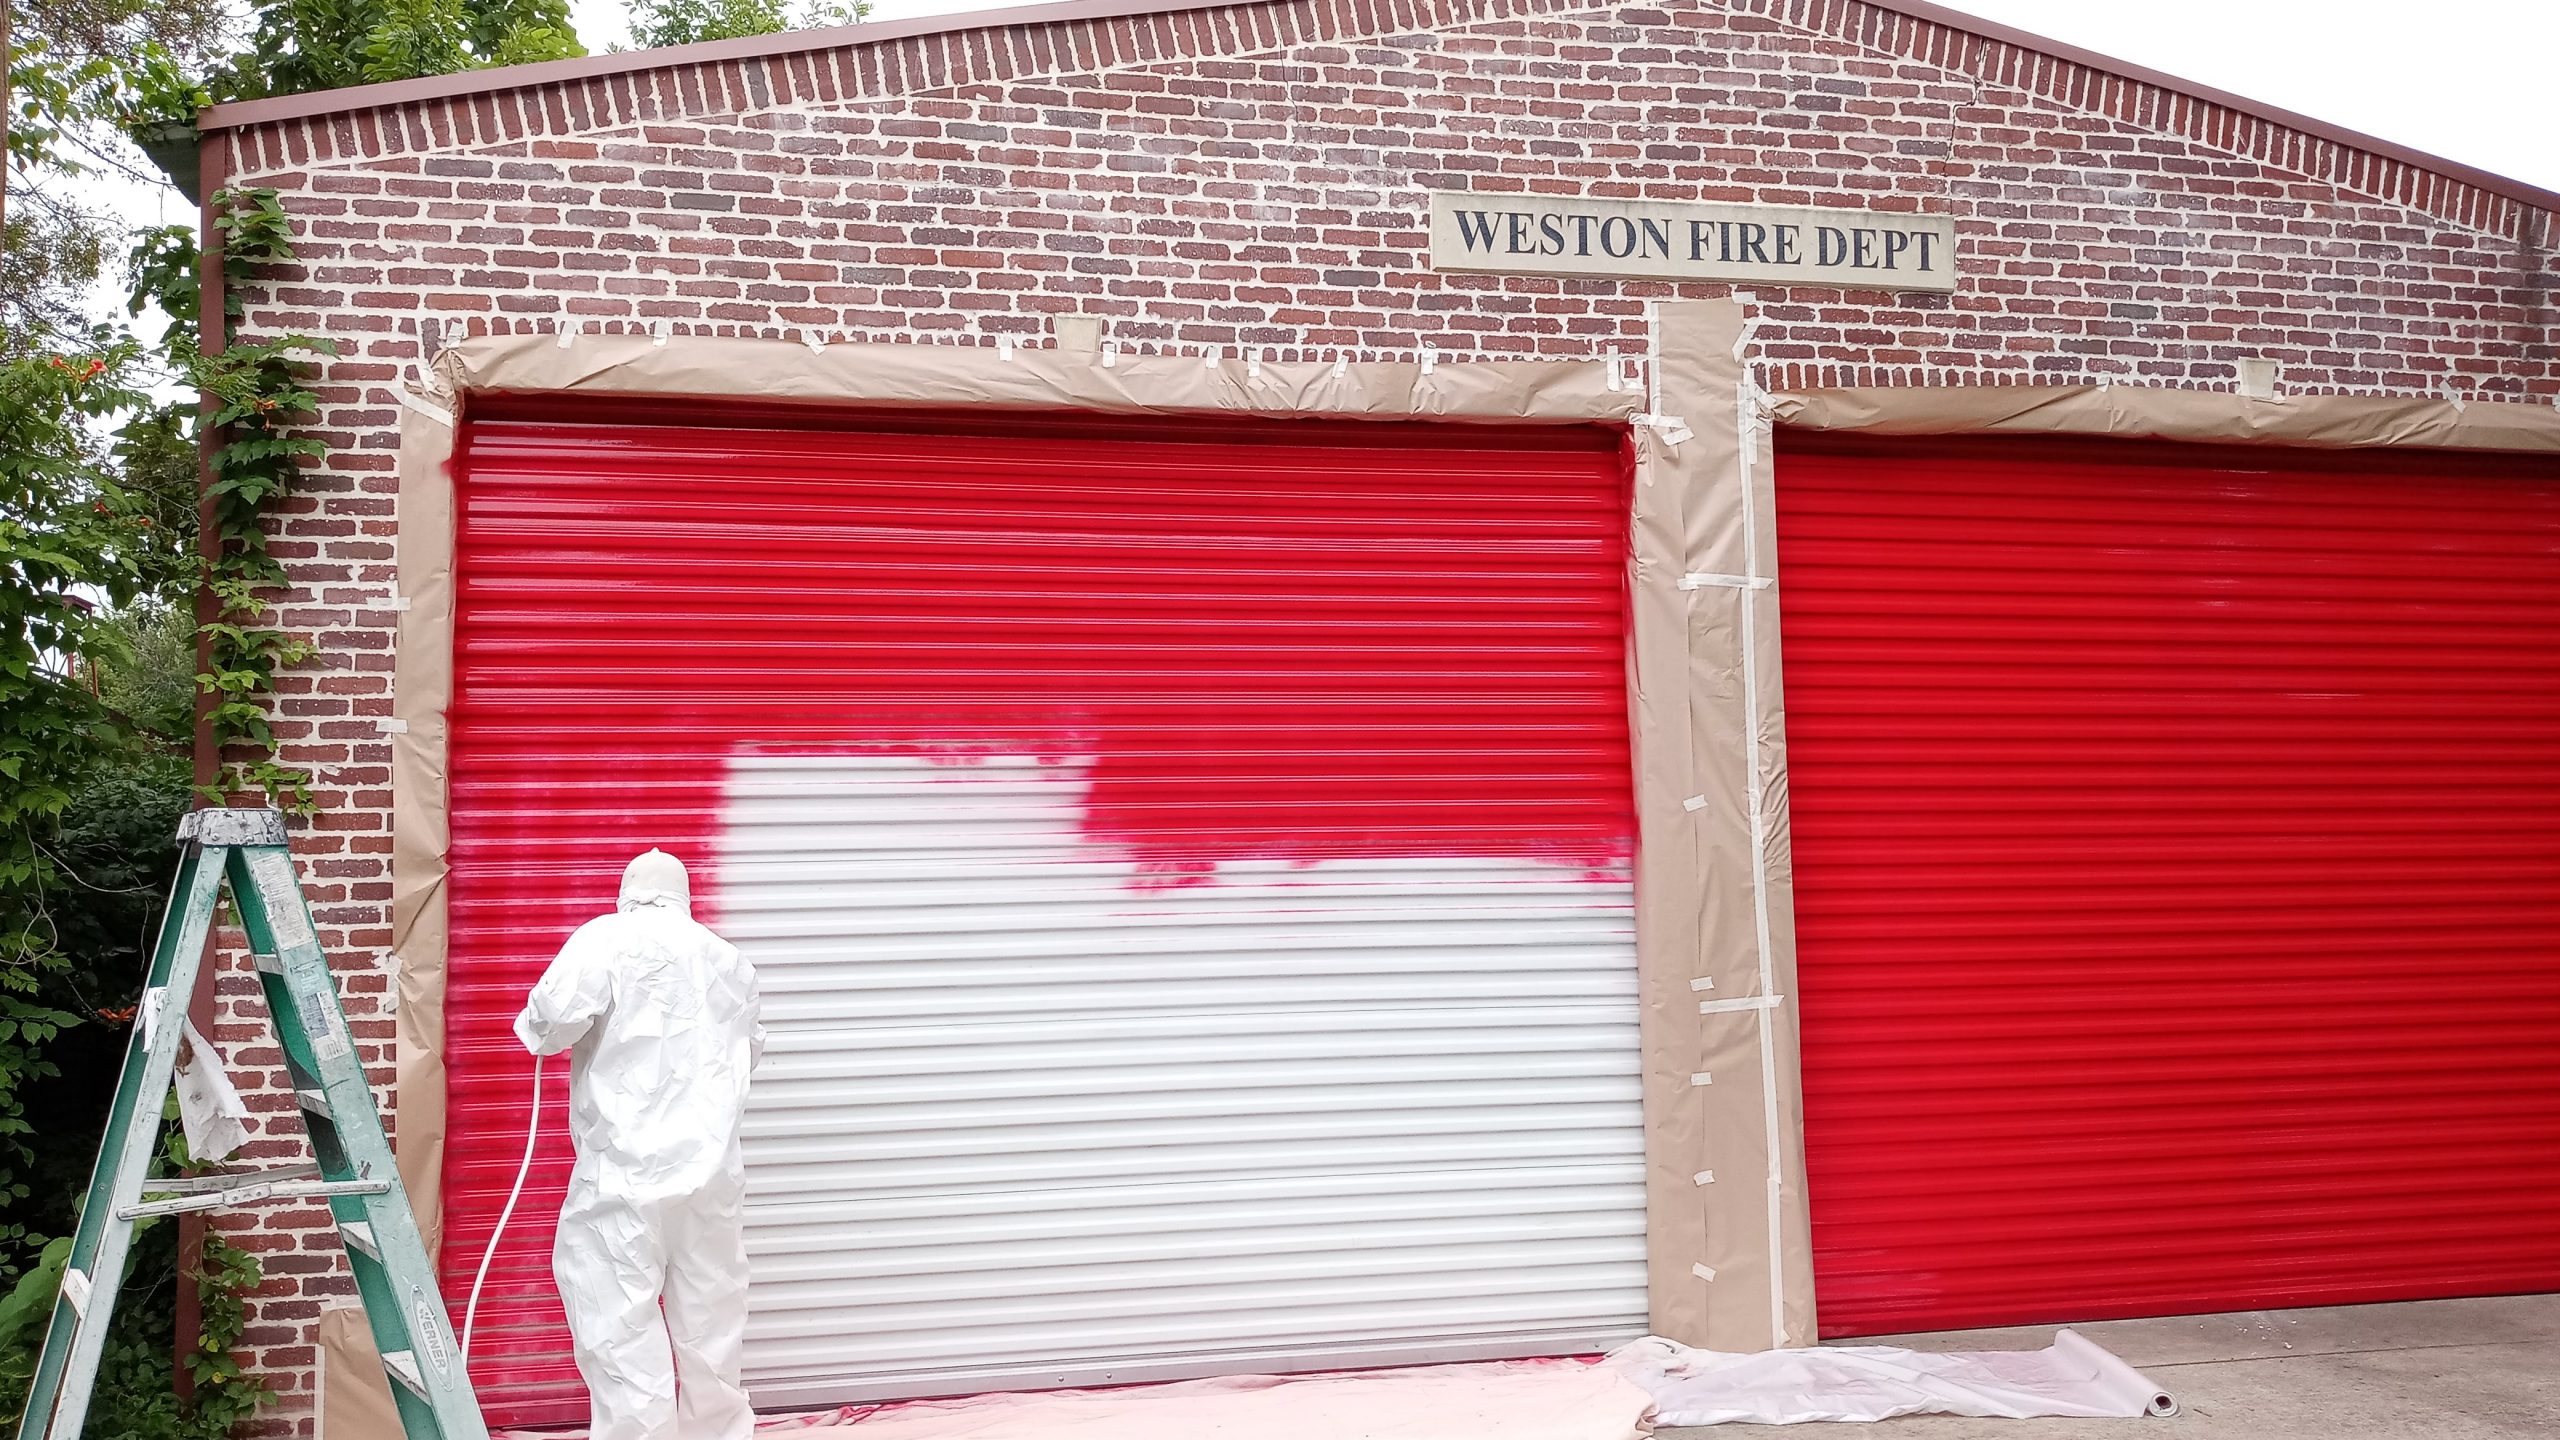 A man painting a fire station